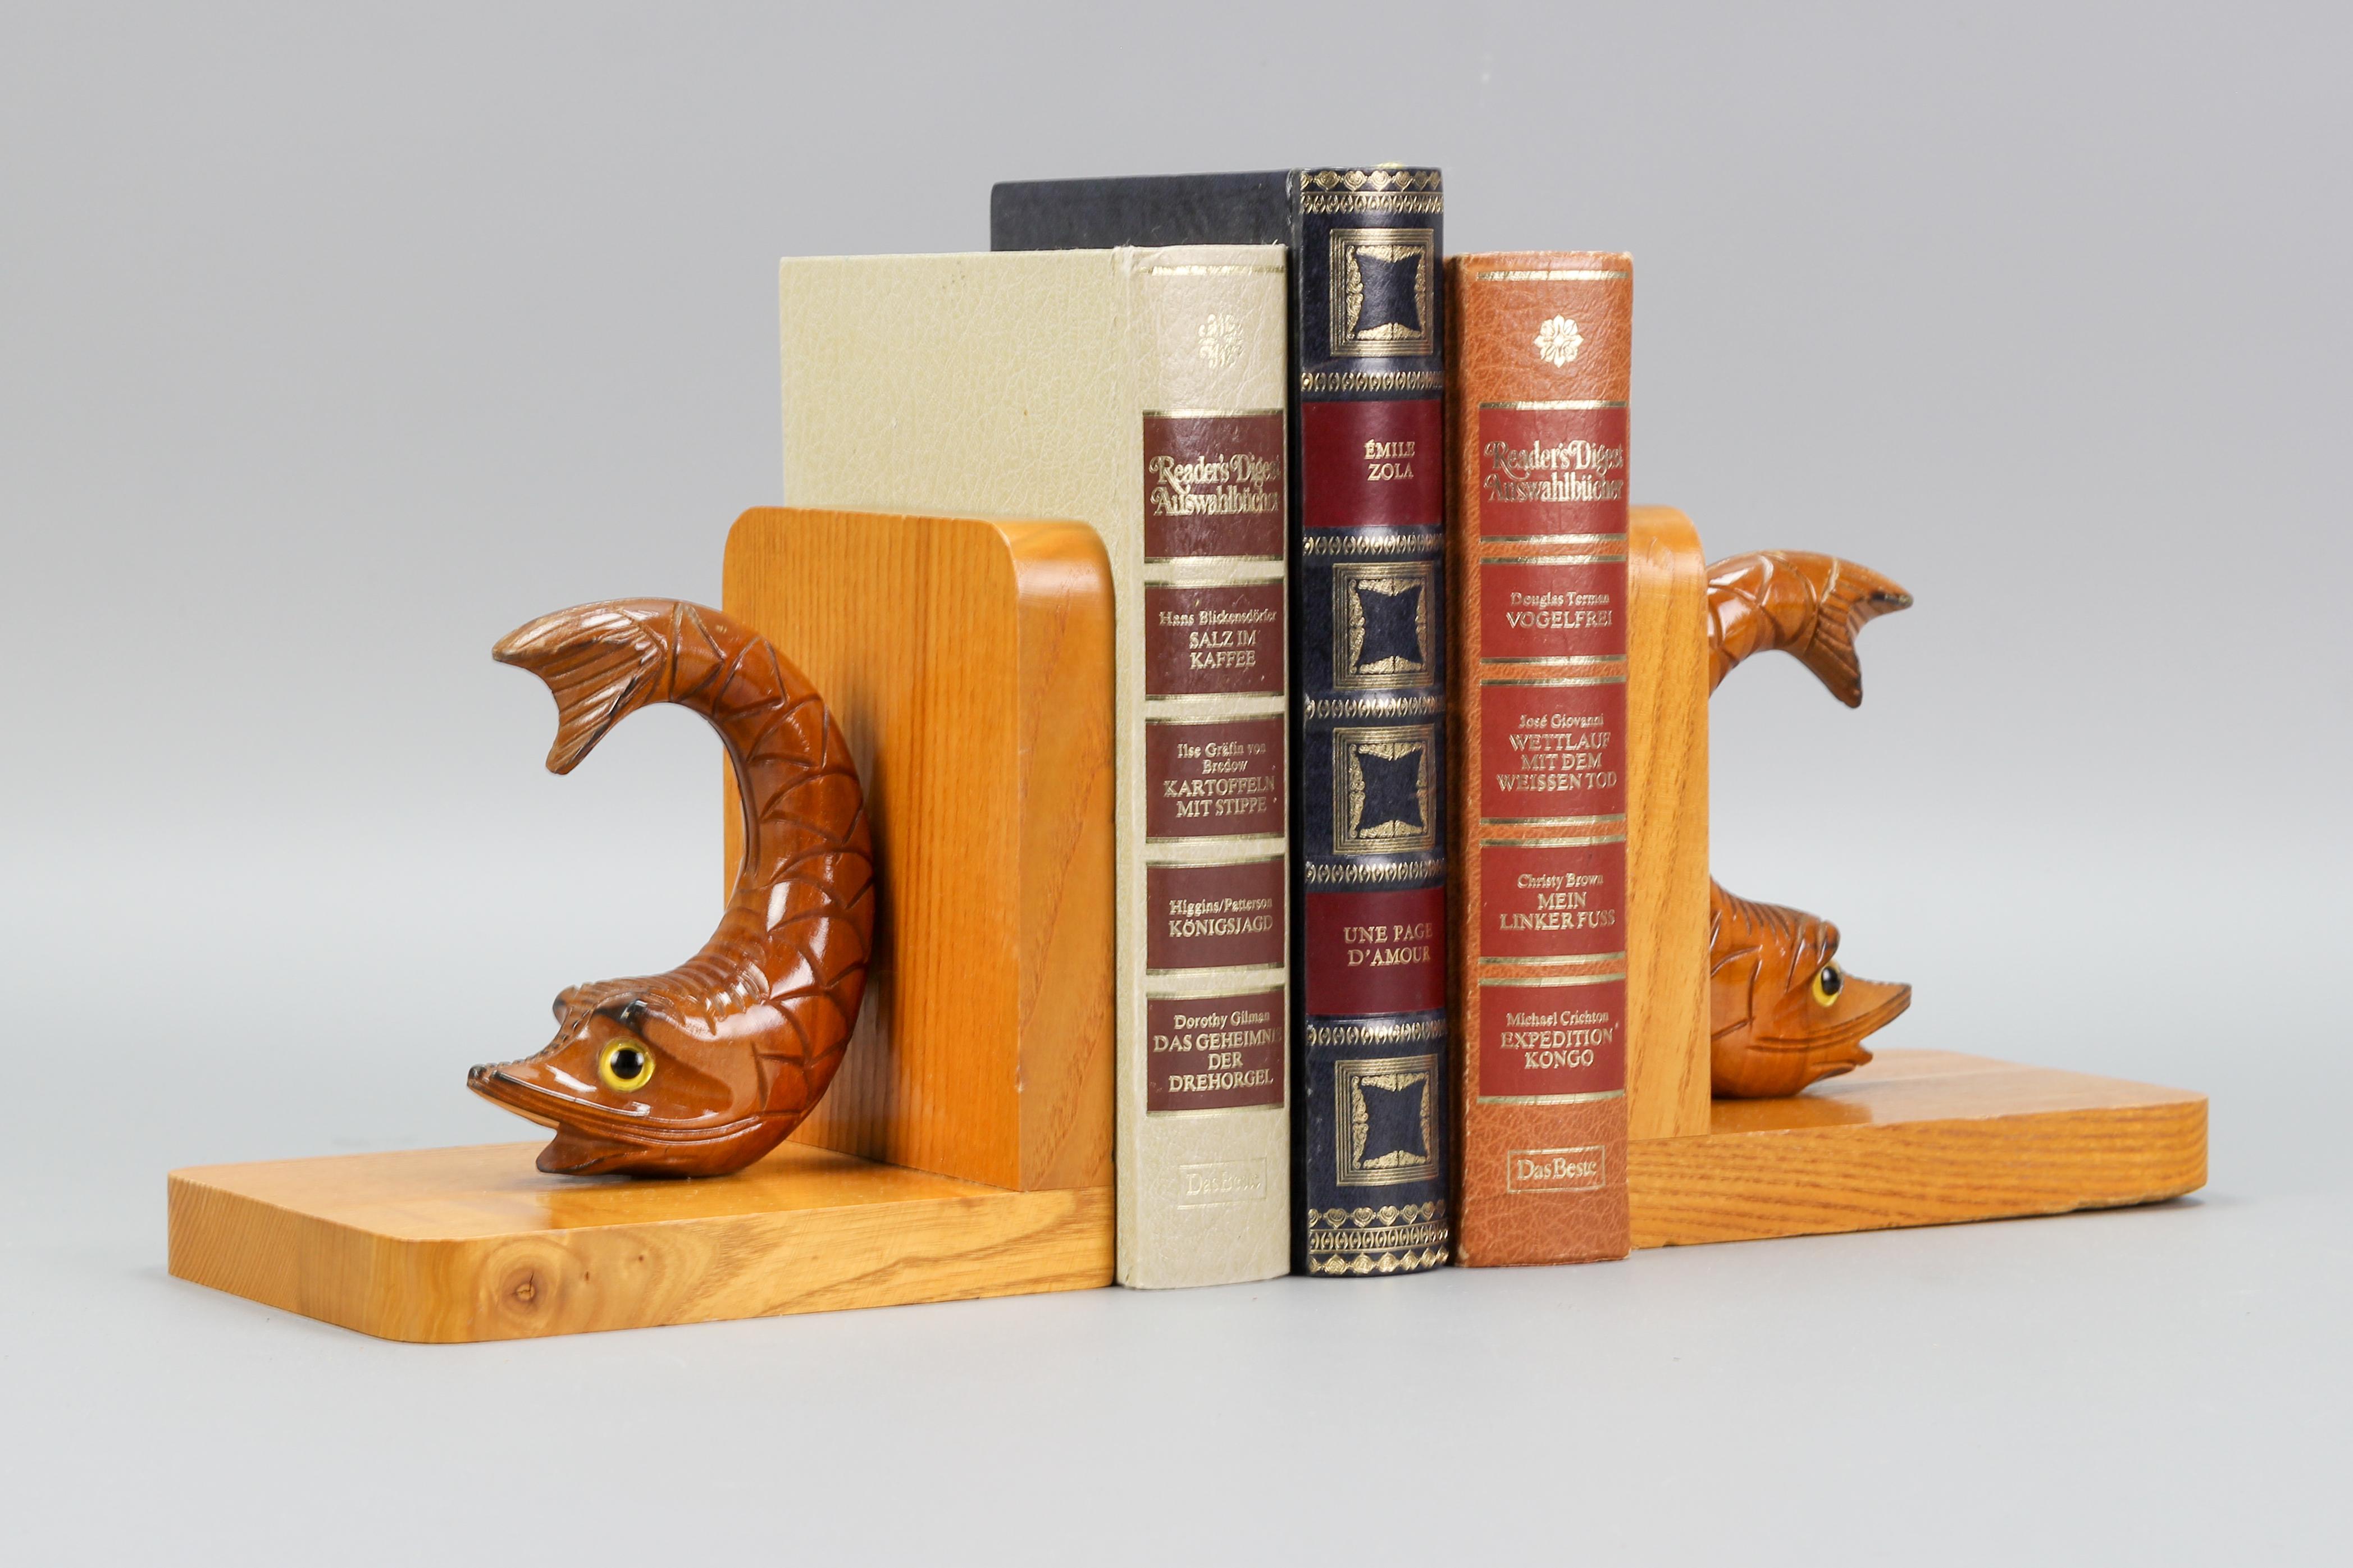 A charming pair of ash wood bookends with carved figurines of sturgeons with beautiful yellow and black eyes. Germany, circa the 1970s.
These adorable bookends will make a wonderful accent on a bookshelf, mantel, or console table. Ideal gift for